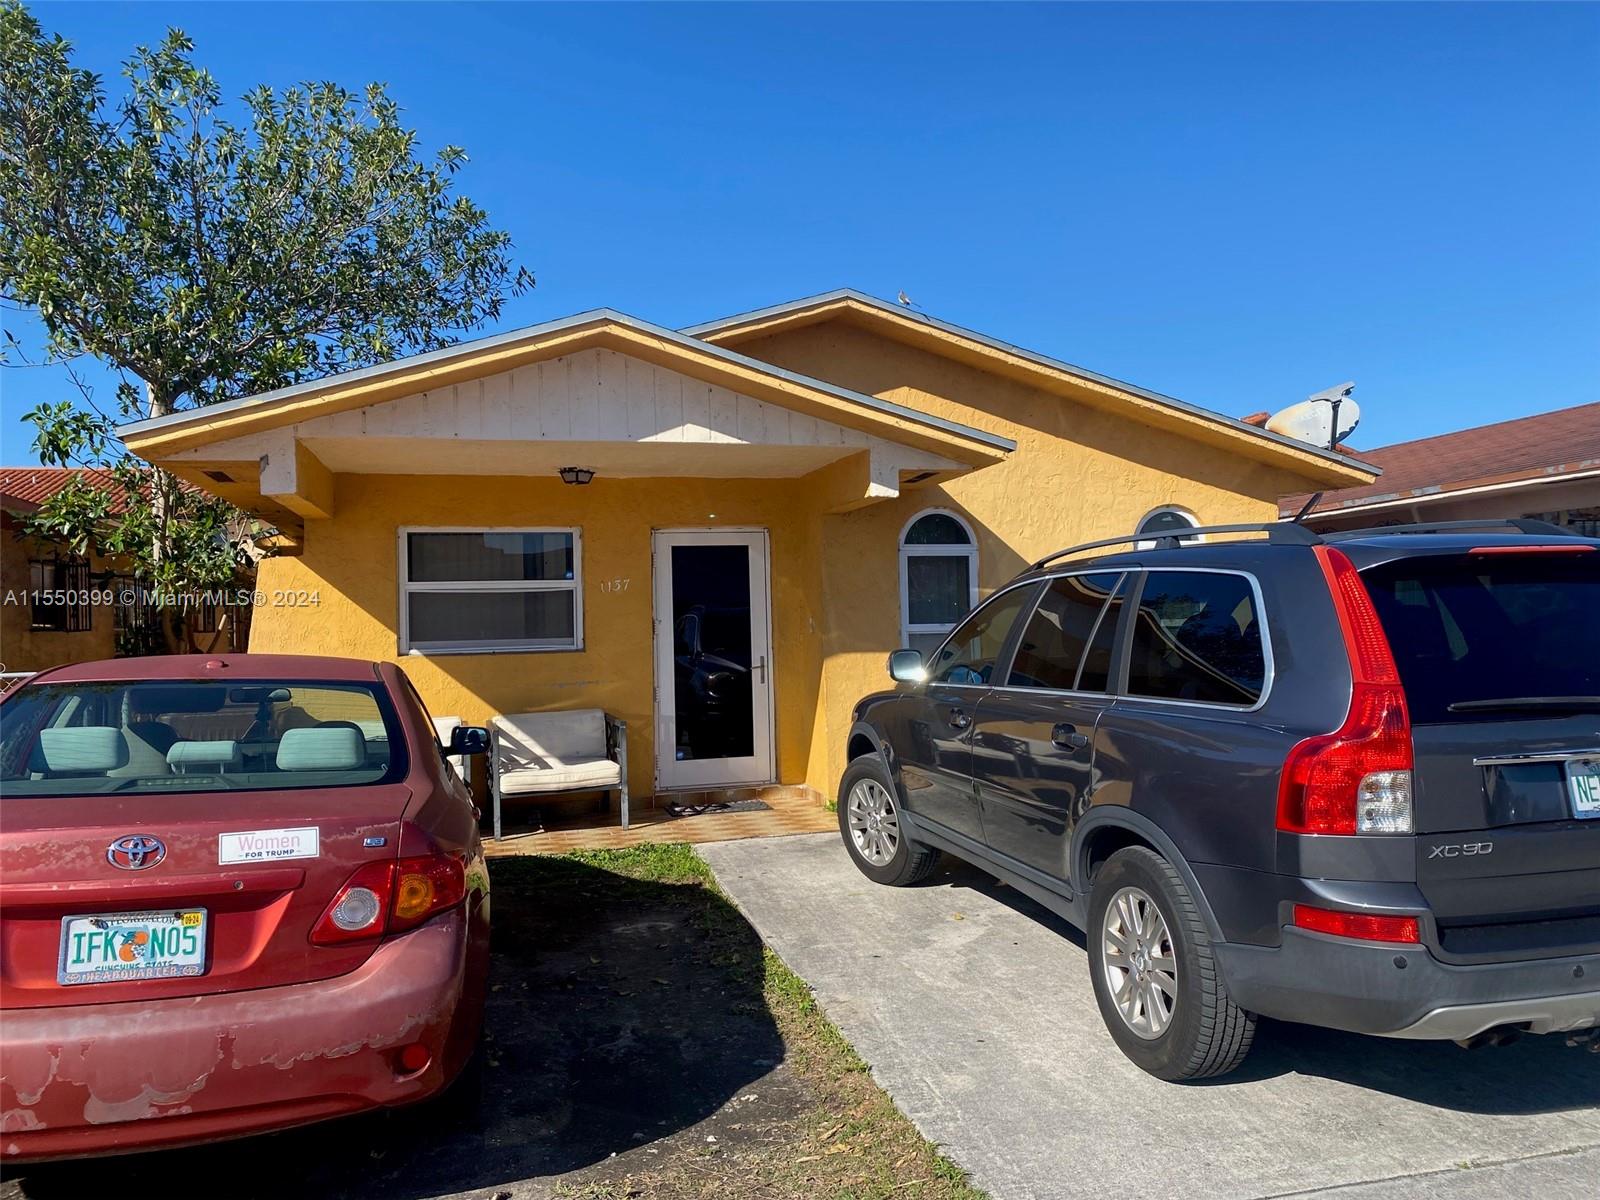 1137 W 40th Pl, Hialeah, Florida 33012, 3 Bedrooms Bedrooms, ,2 BathroomsBathrooms,Residential,For Sale,1137 W 40th Pl,A11550399